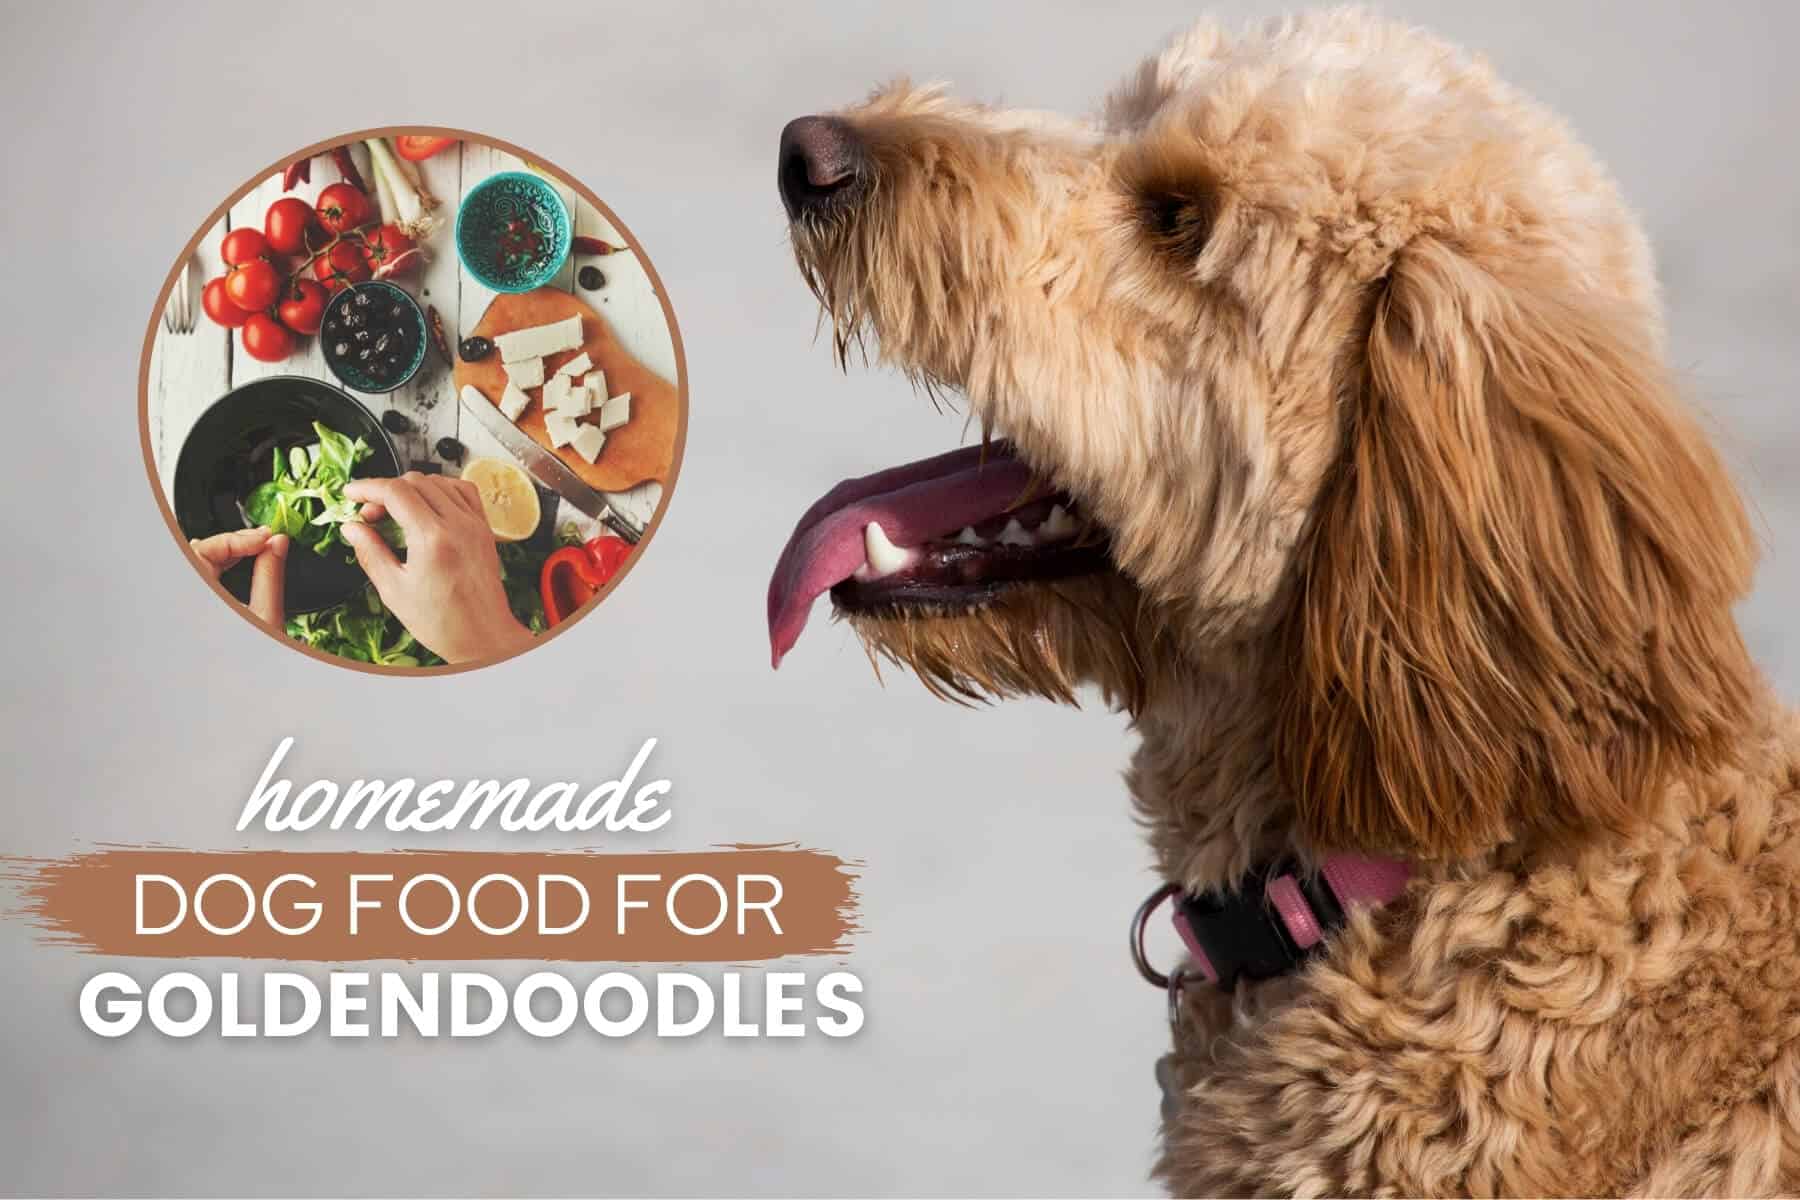 What to Feed Goldendoodles?